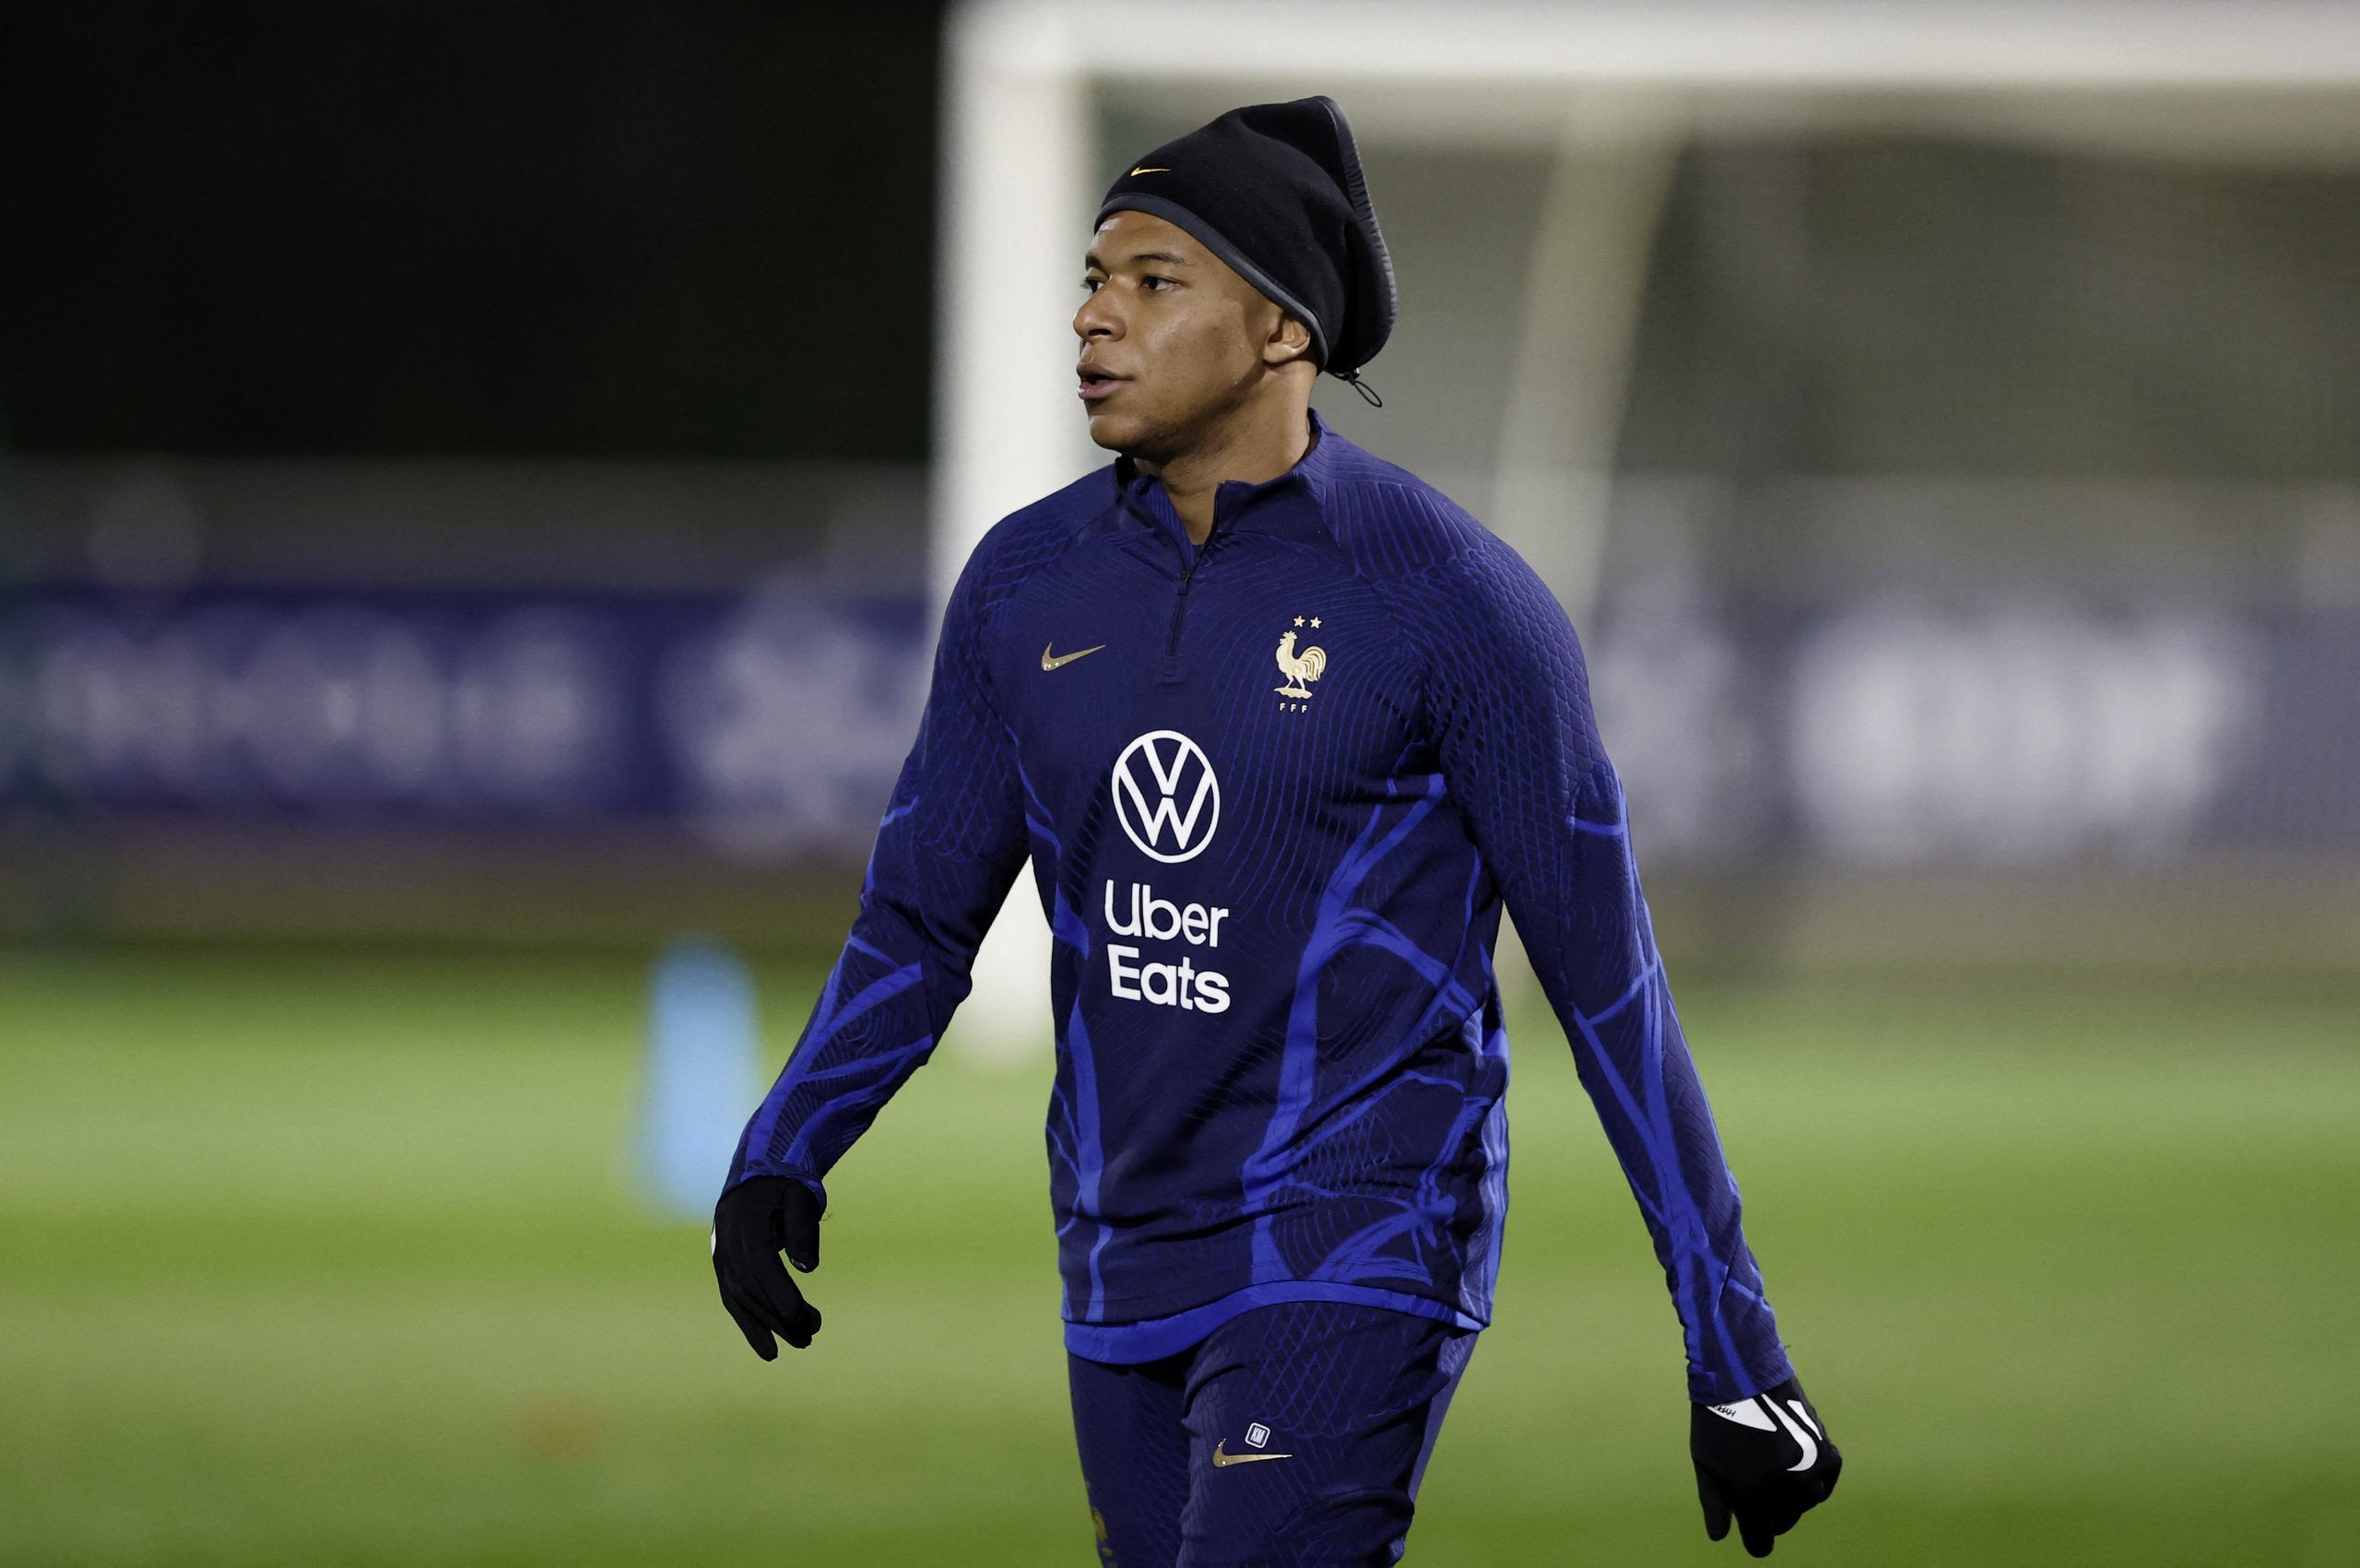 Soccer Football - FIFA World Cup Qatar 2022 - France team Training - INF Clairefontaine, Clairefontaine-en-Yvelines, France - November 15, 2022 France's Kylian Mbappe during training REUTERS/Benoit Tessier